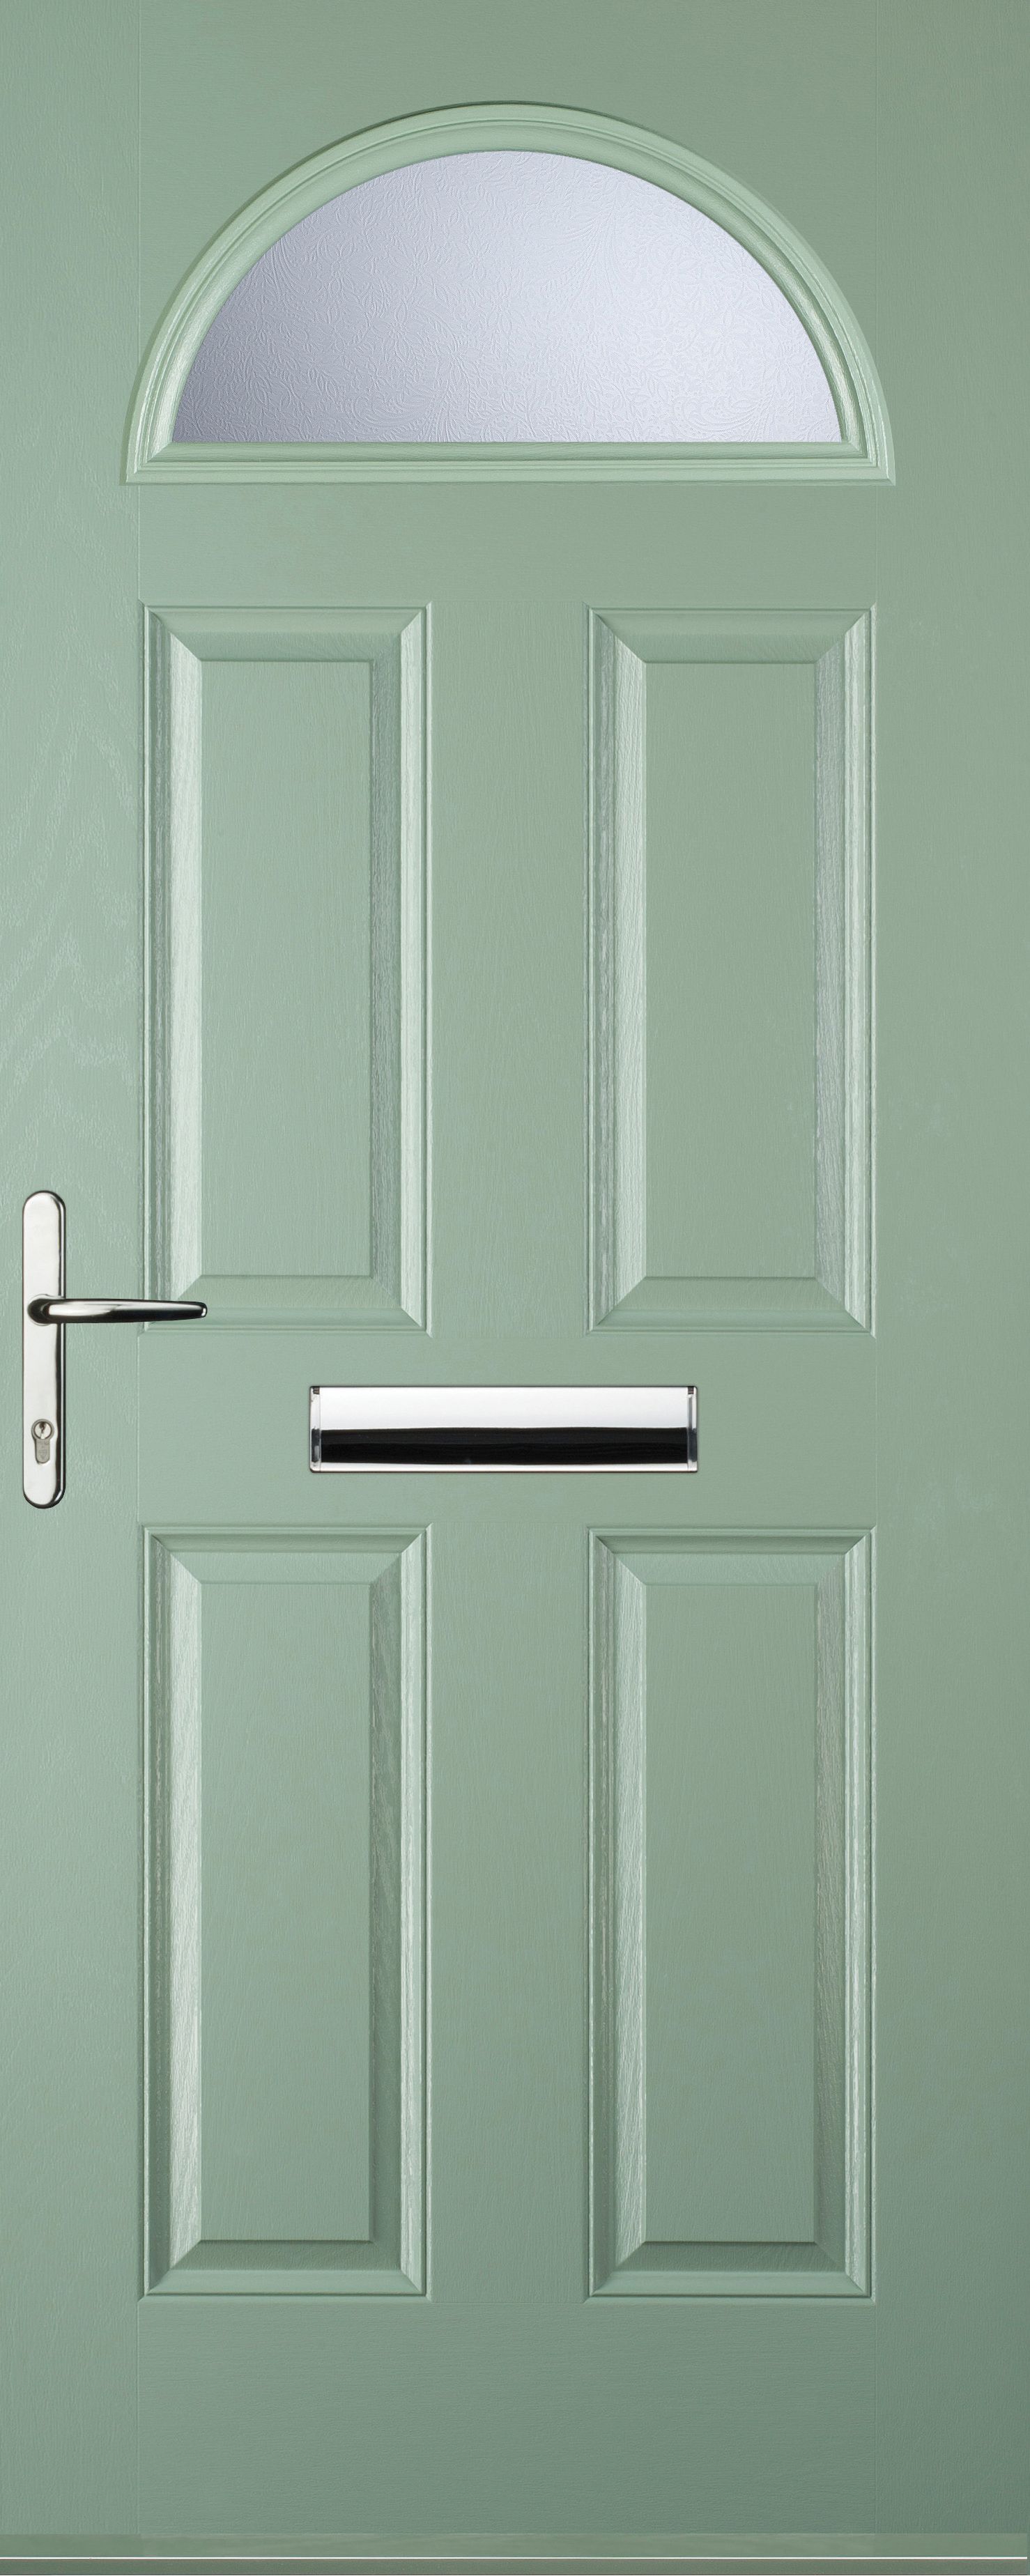 Image of Euramax 4 Panel 1 Arch Right Hand Chartwell Green Composite Door - 920 x 2100mm